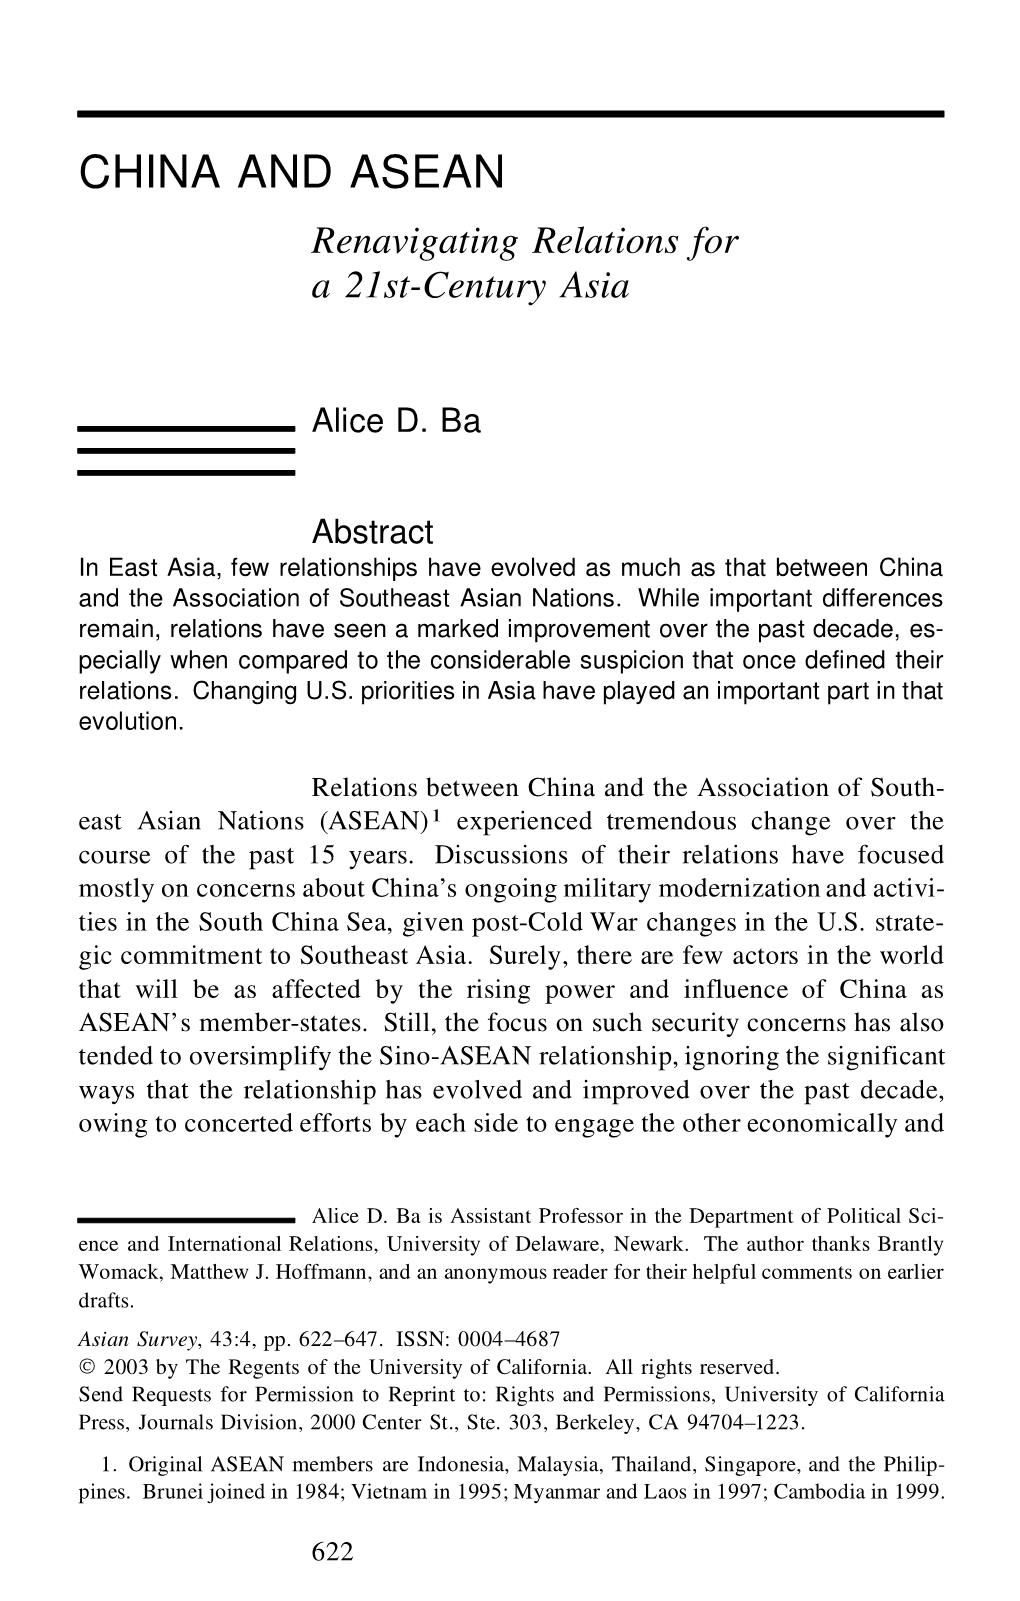 China and Asean: Renavigating Relations for a 21St-Century Asia